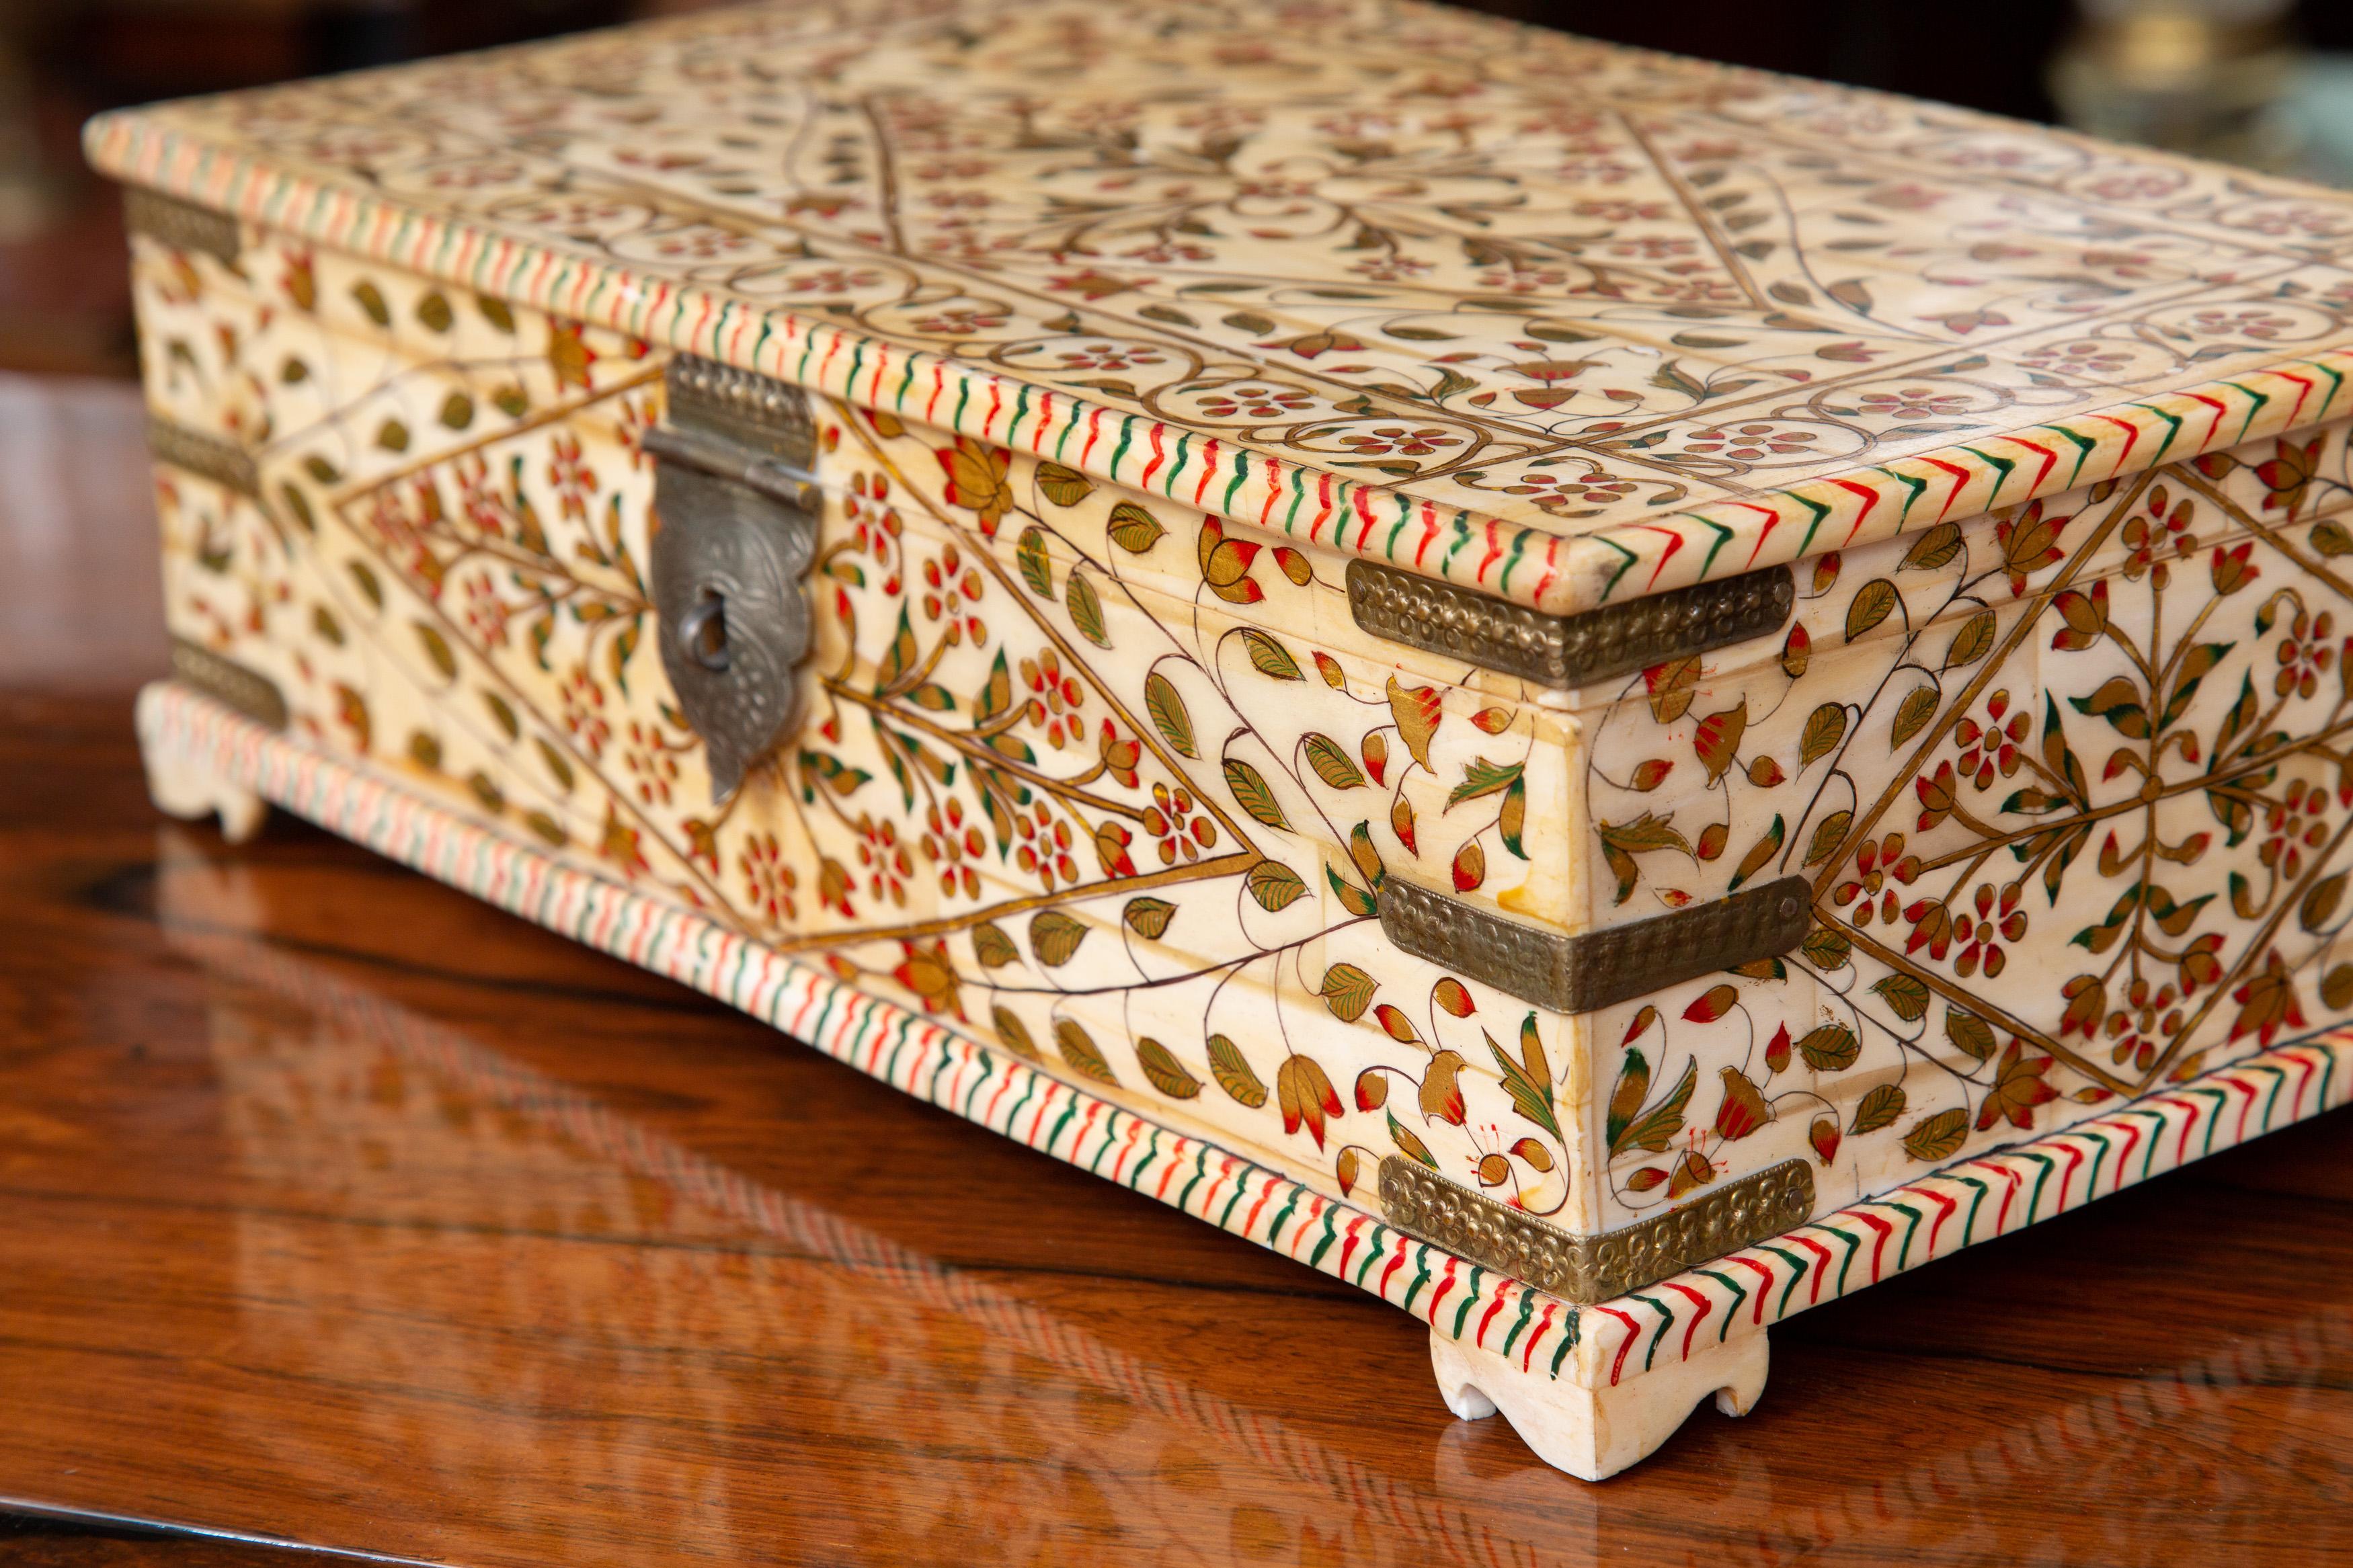 This is an Indian bone-veneered lidded box, painted over-all with colorful flowers and foliage.